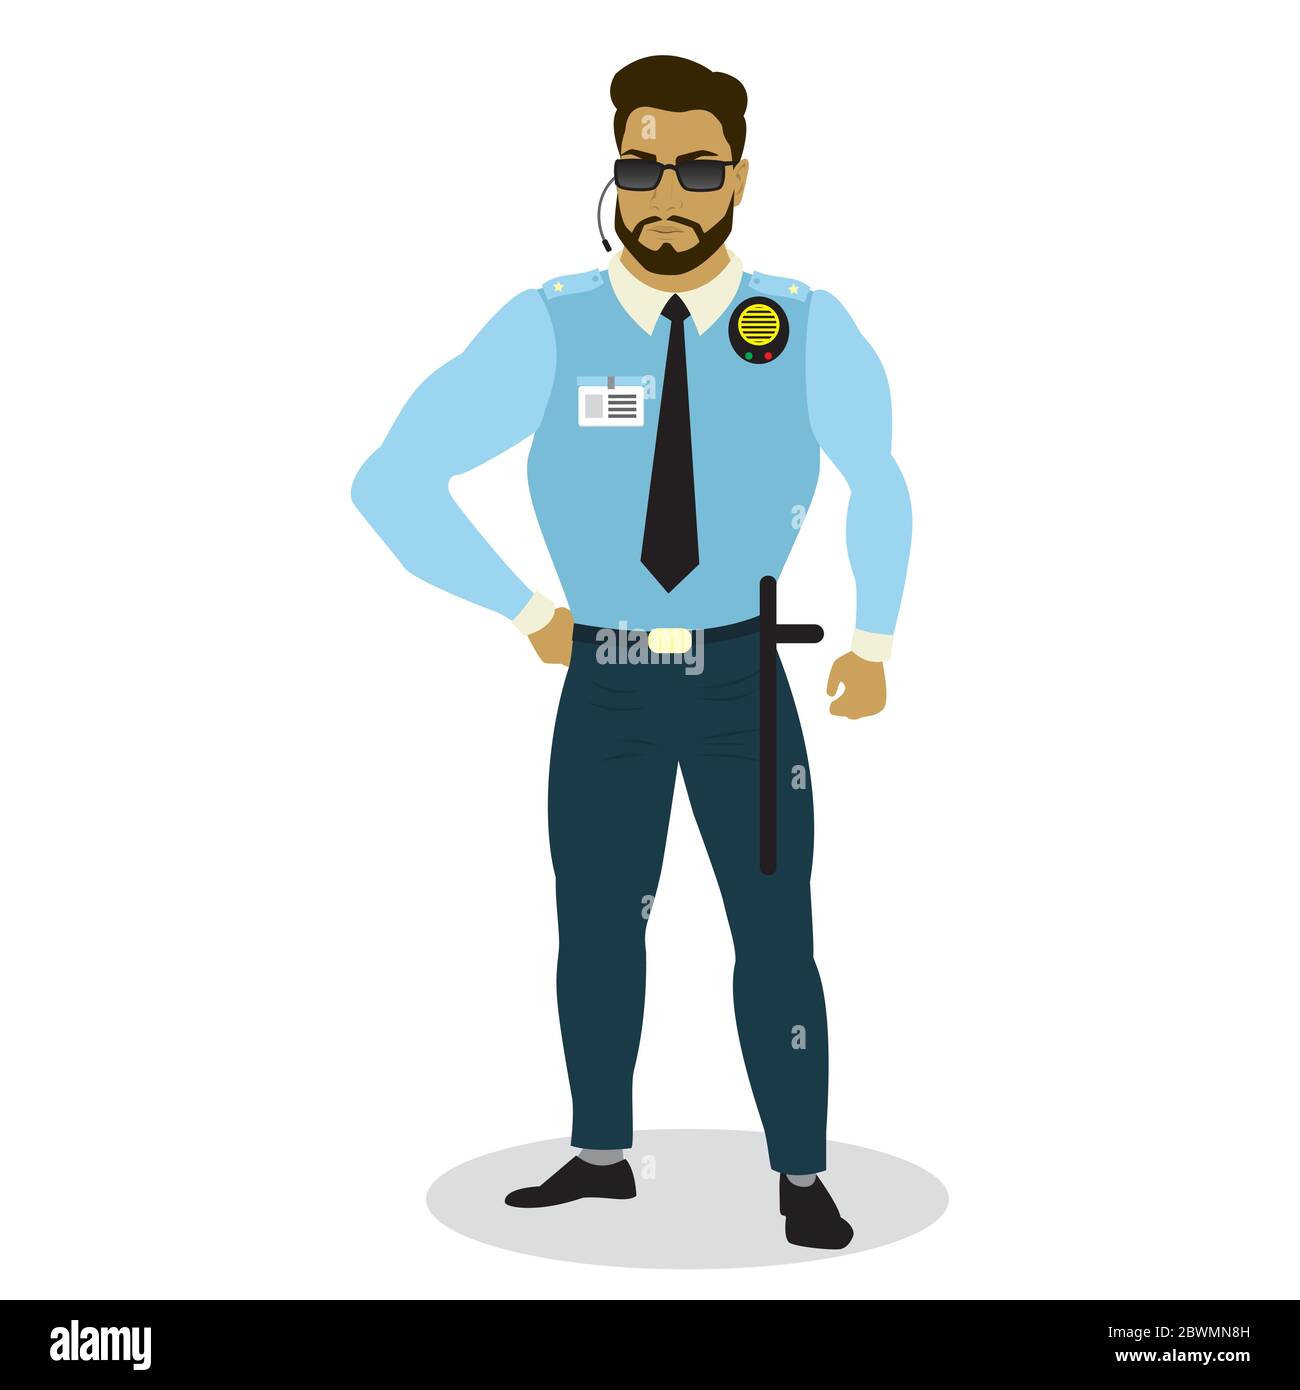 Security man,human character,isolated on white background,flat vector illustration Stock Vector